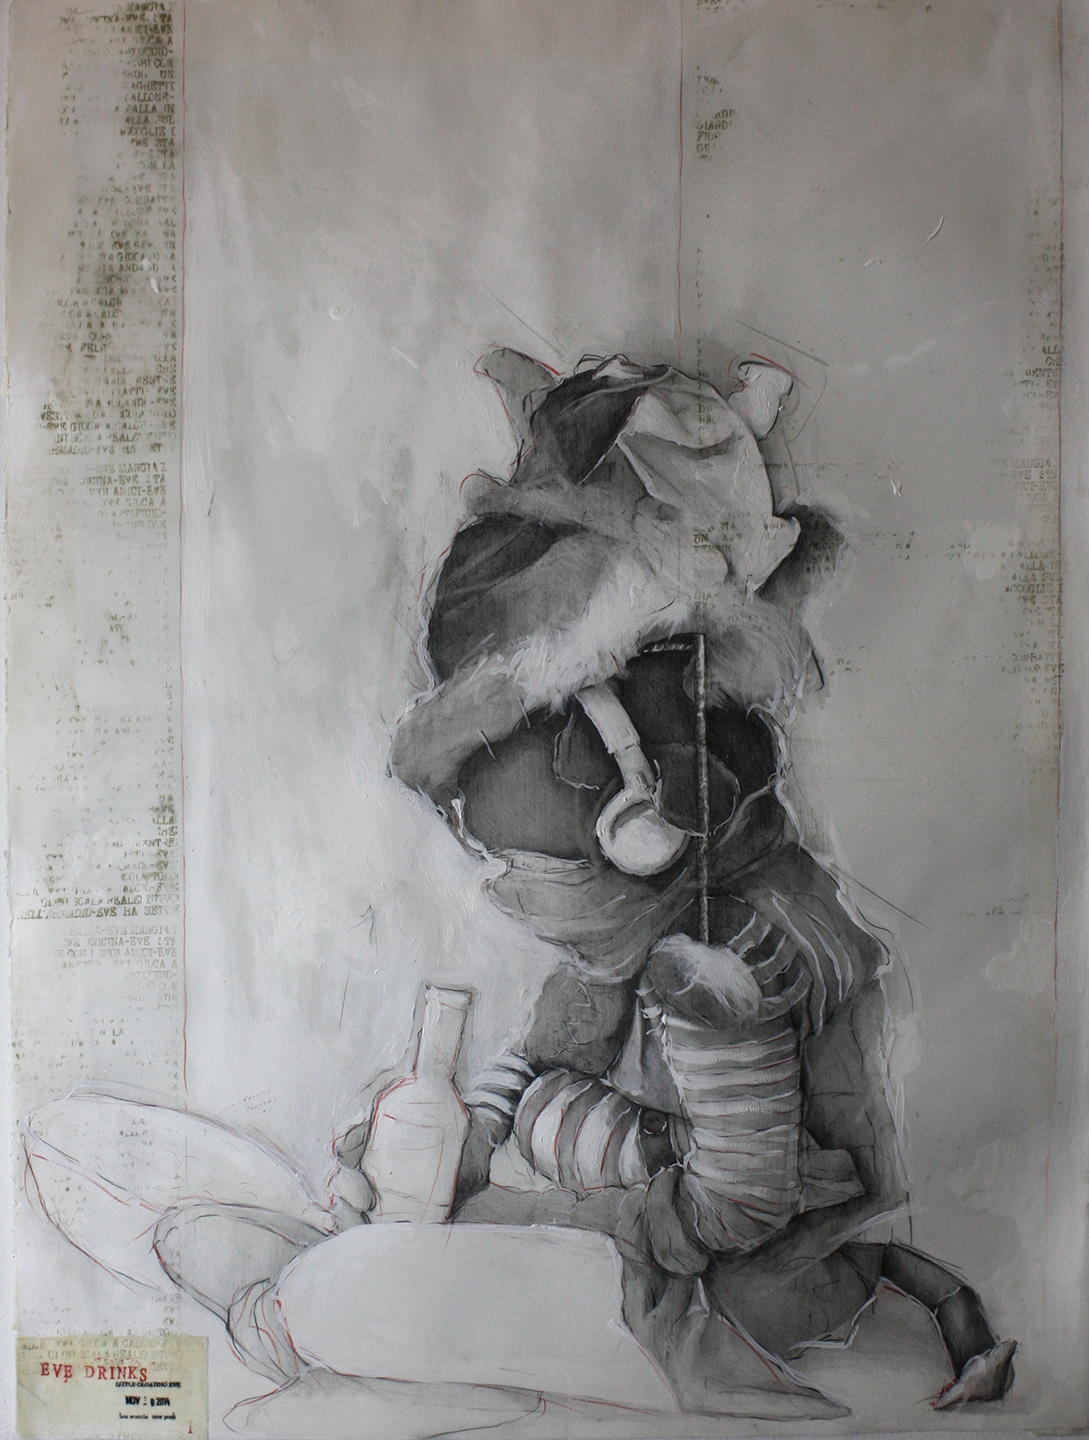  Eve drinks 2014  Pencil, oil, gesso and wax on paper, 30x22.5 inches 